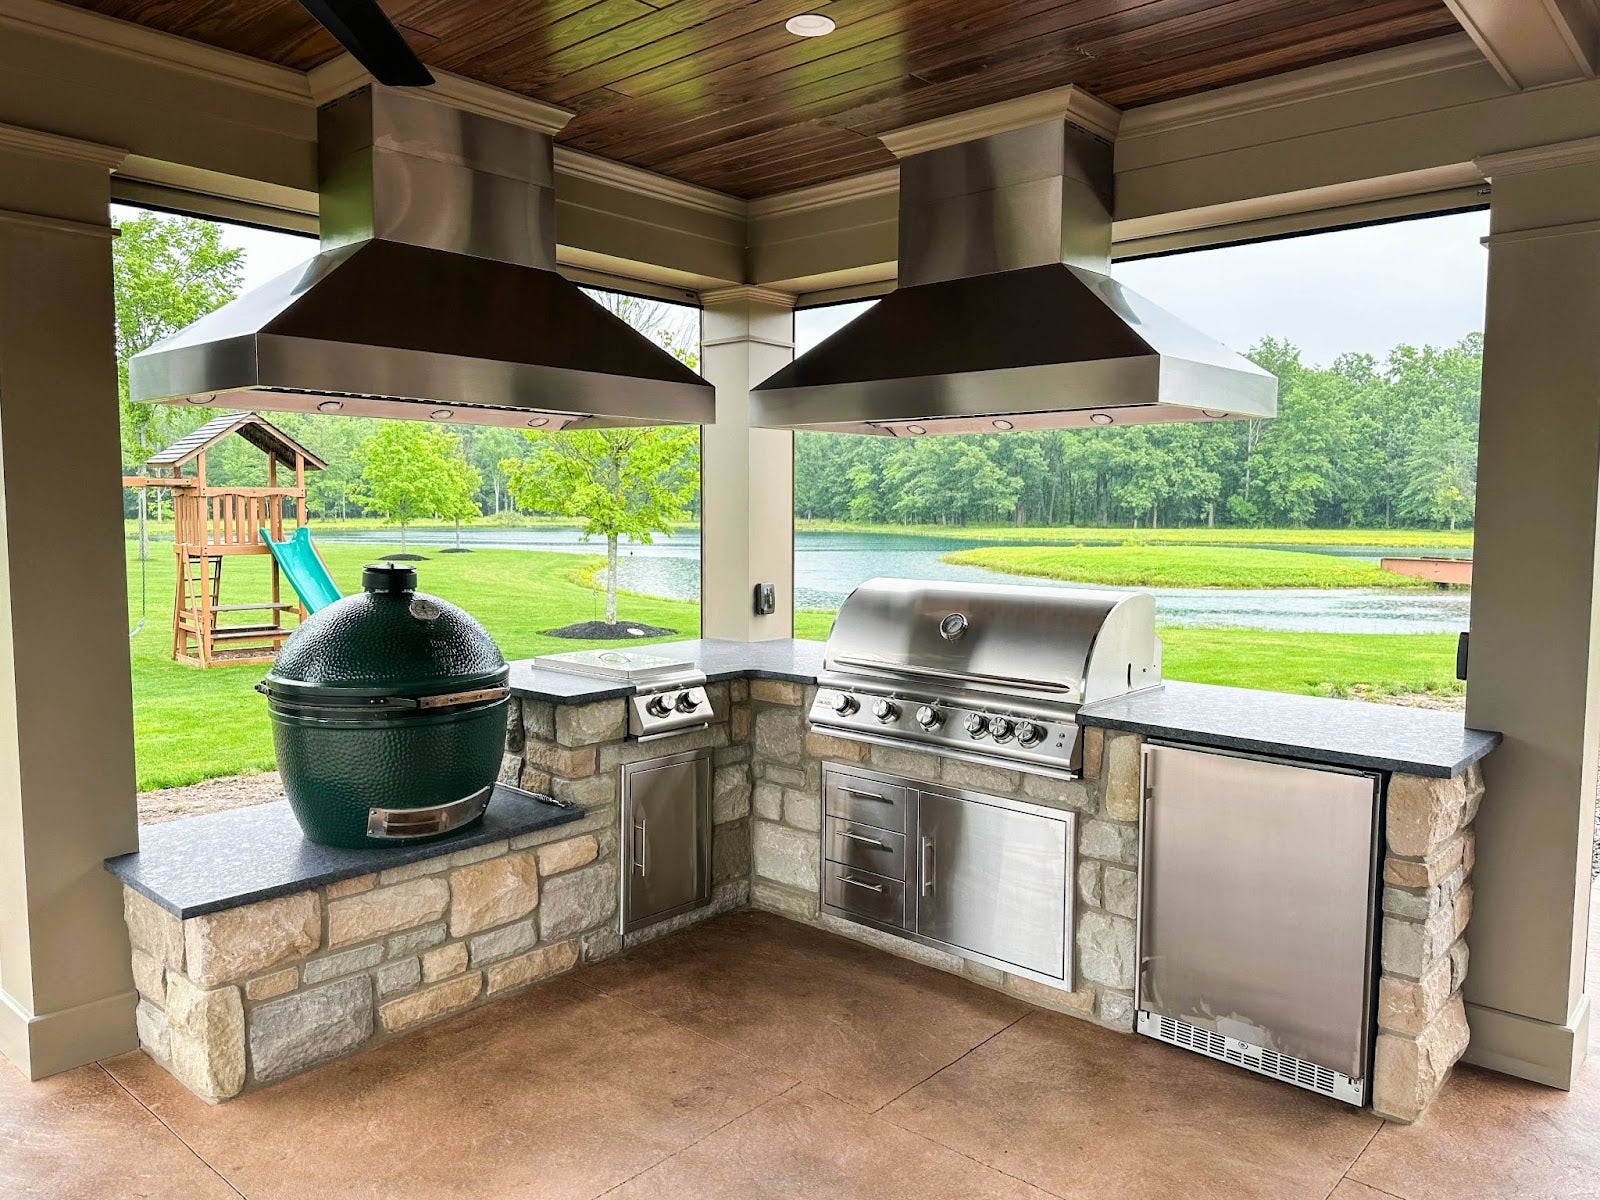 Spacious outdoor kitchen with premium stainless steel grill, smoker, and appliances set against a stone countertop with a view of a playground and pond in the background. - Proline Range Hoods - prolinerangehoods.com 